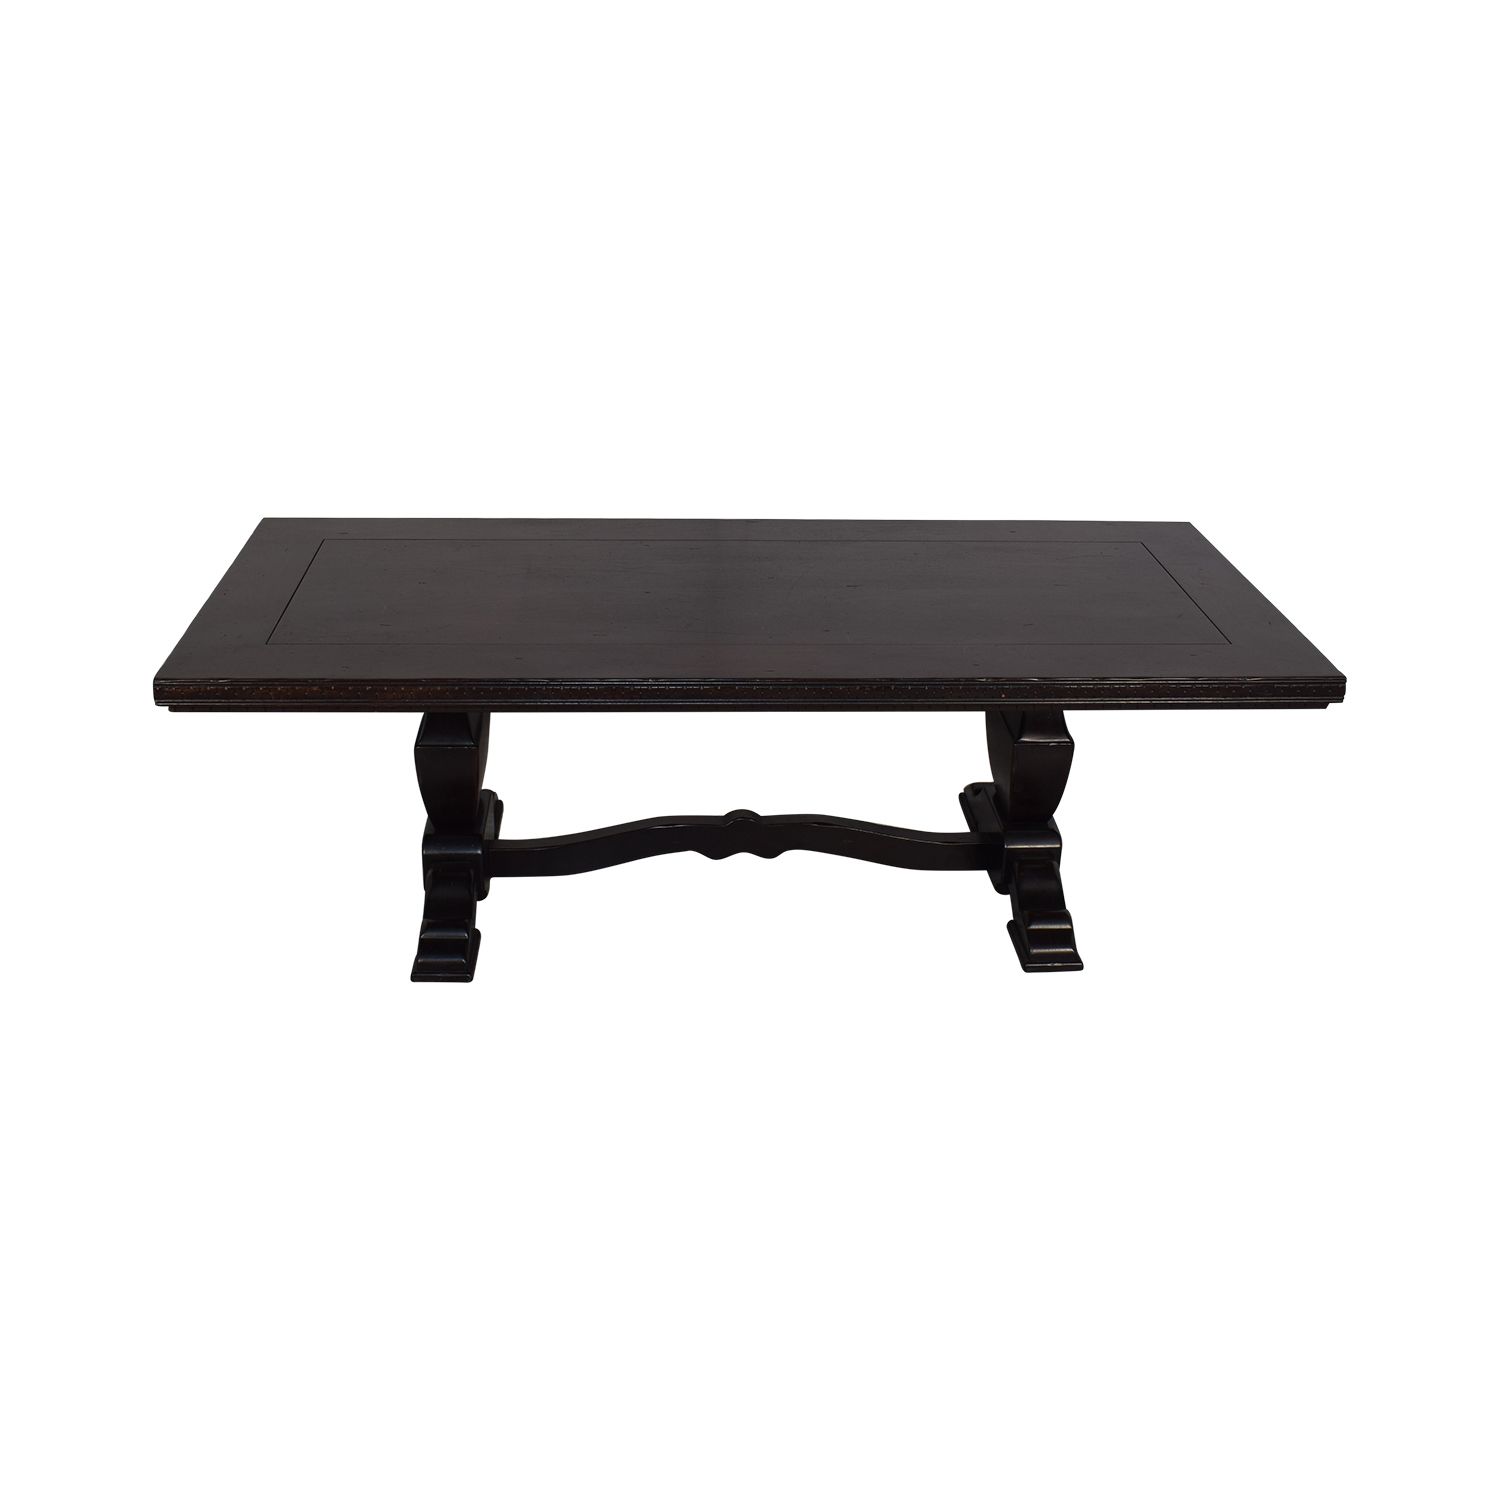 75% Off – South Cone Furniture South Cone Furniture Salvatore Dining Table  / Tables With Regard To Latest Salvaged Black Shayne Drop Leaf Kitchen Tables (View 17 of 25)